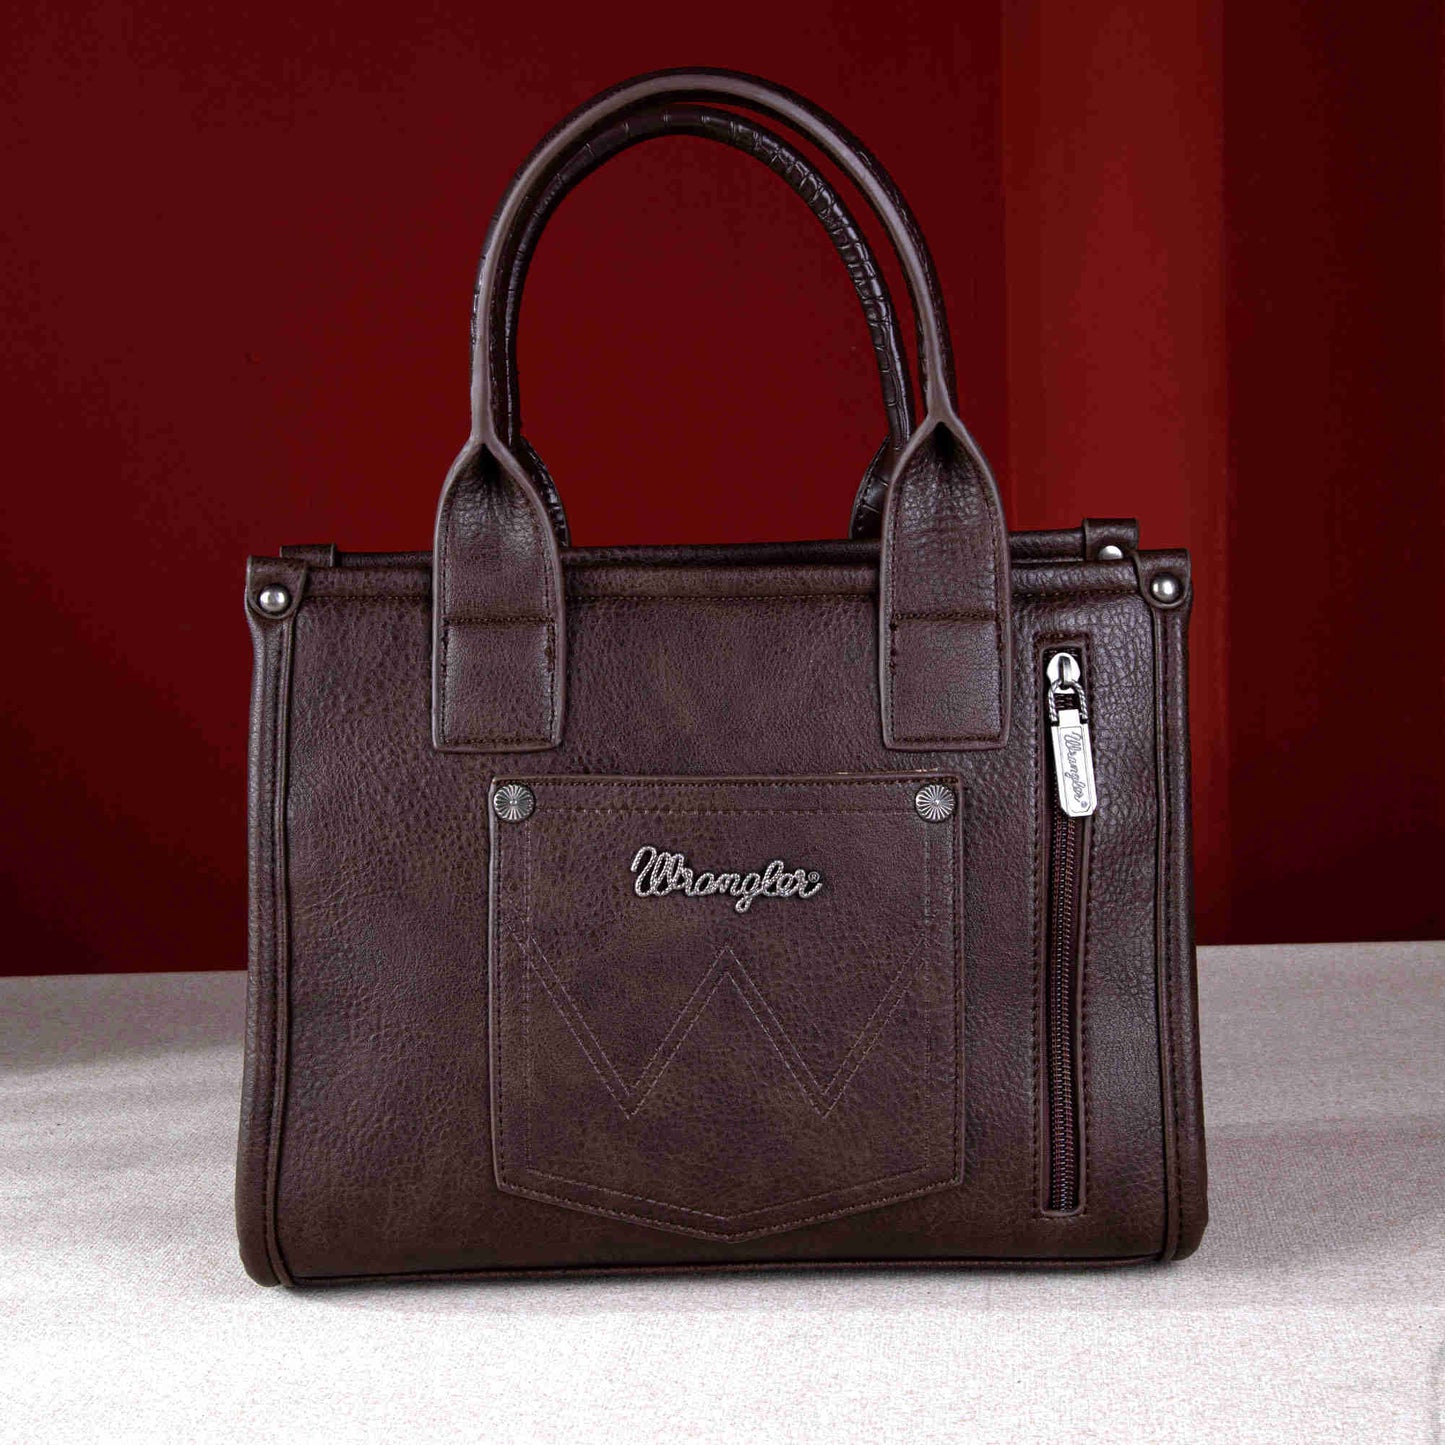 Wrangler Croc Print Concealed Carry Tote/Crossbody - Coffee